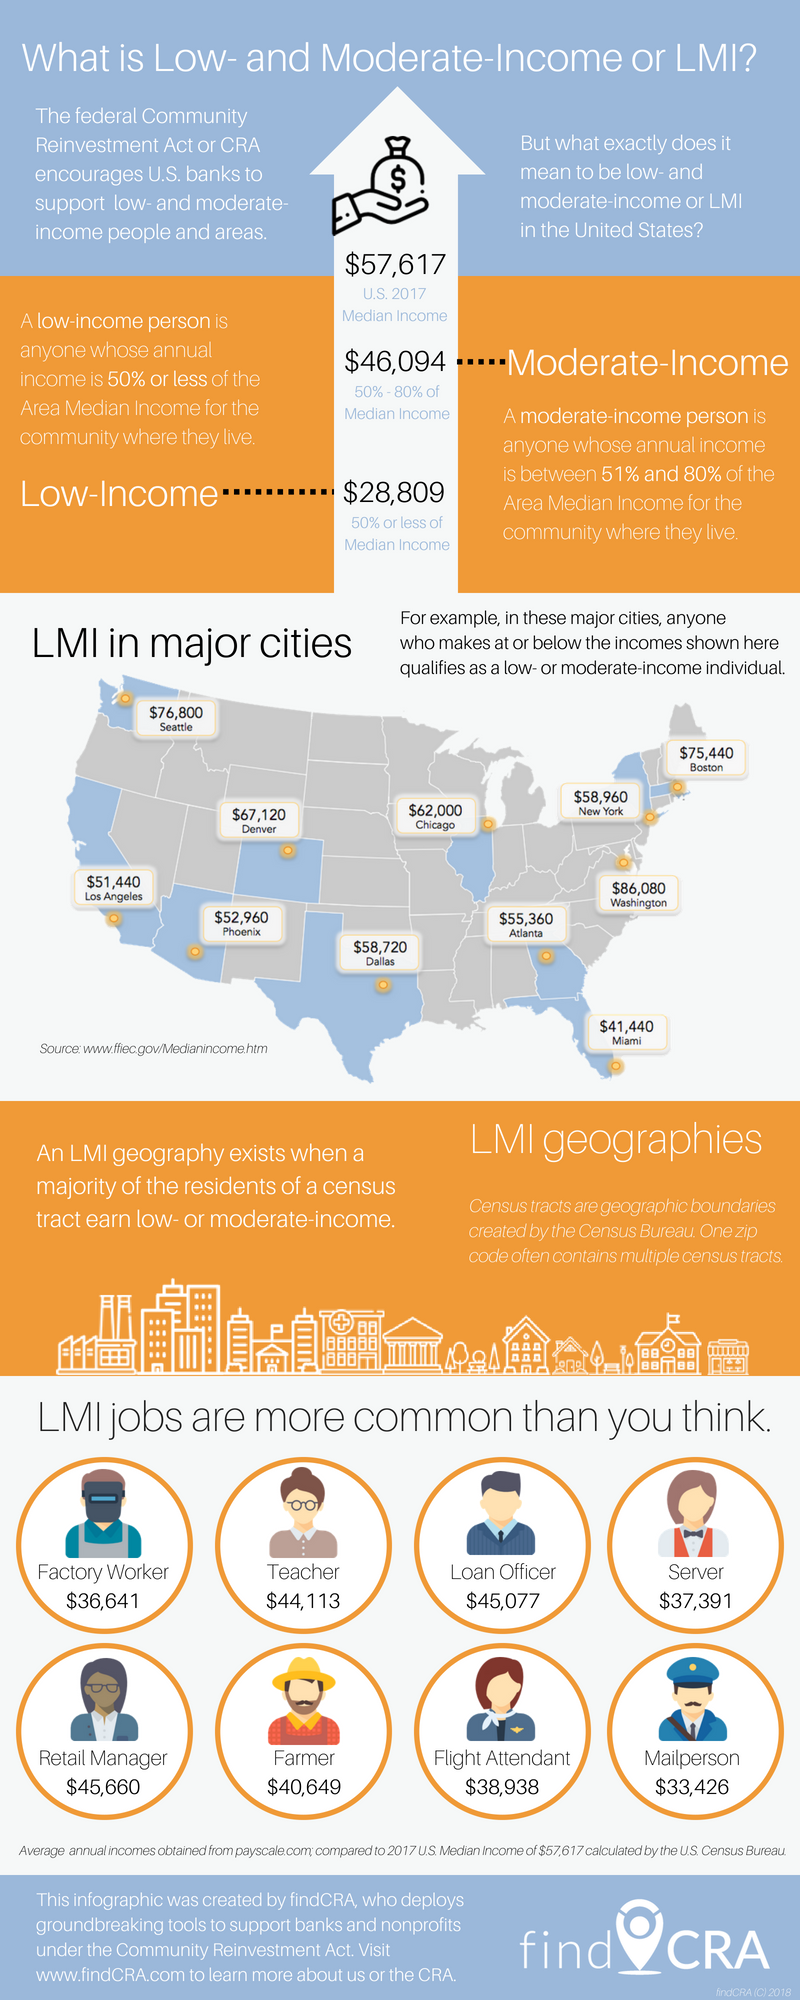 Ever Wondered “What is Low- and Moderate-Income or LMI”? Here's